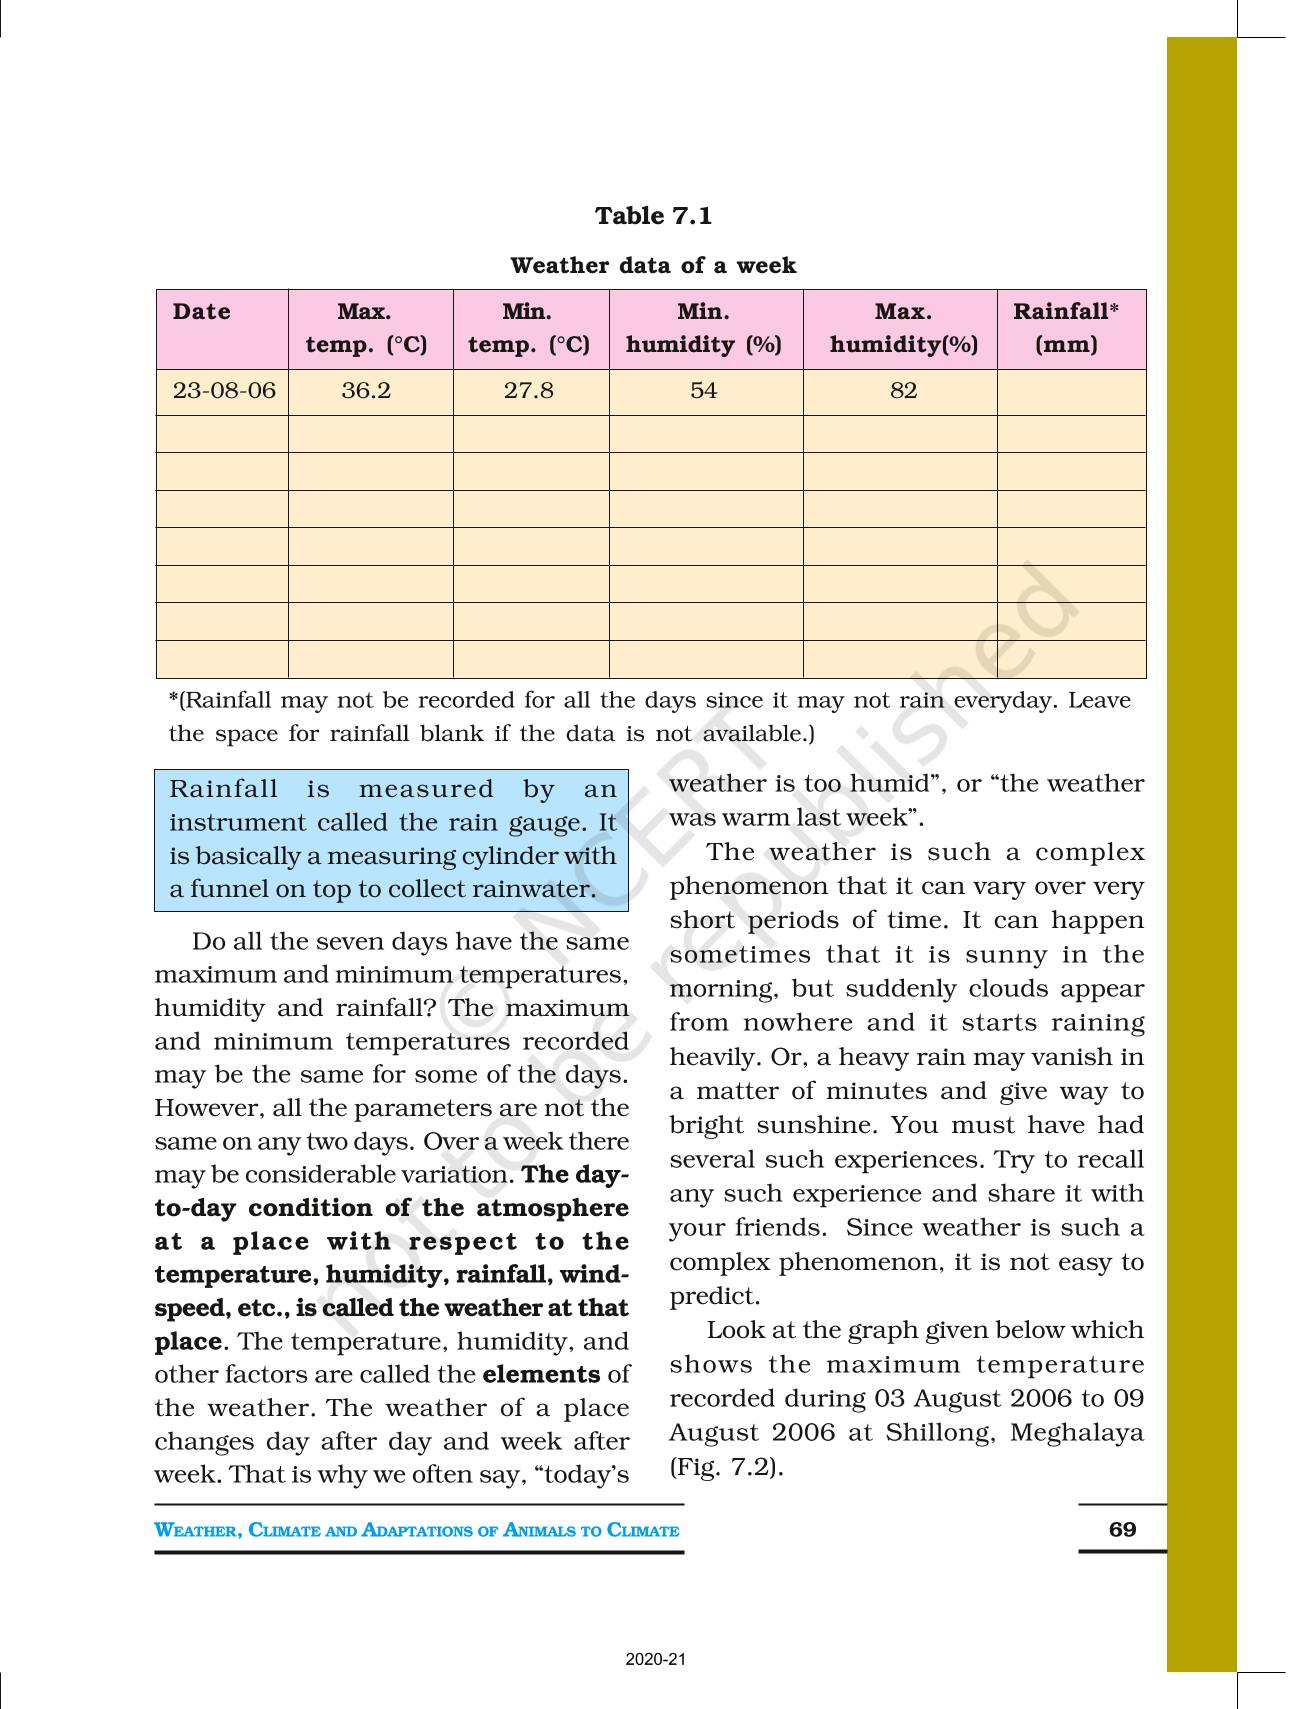 Weather Climate And Adaptations Of Animals To Climate - NCERT Book of Class  7 Science